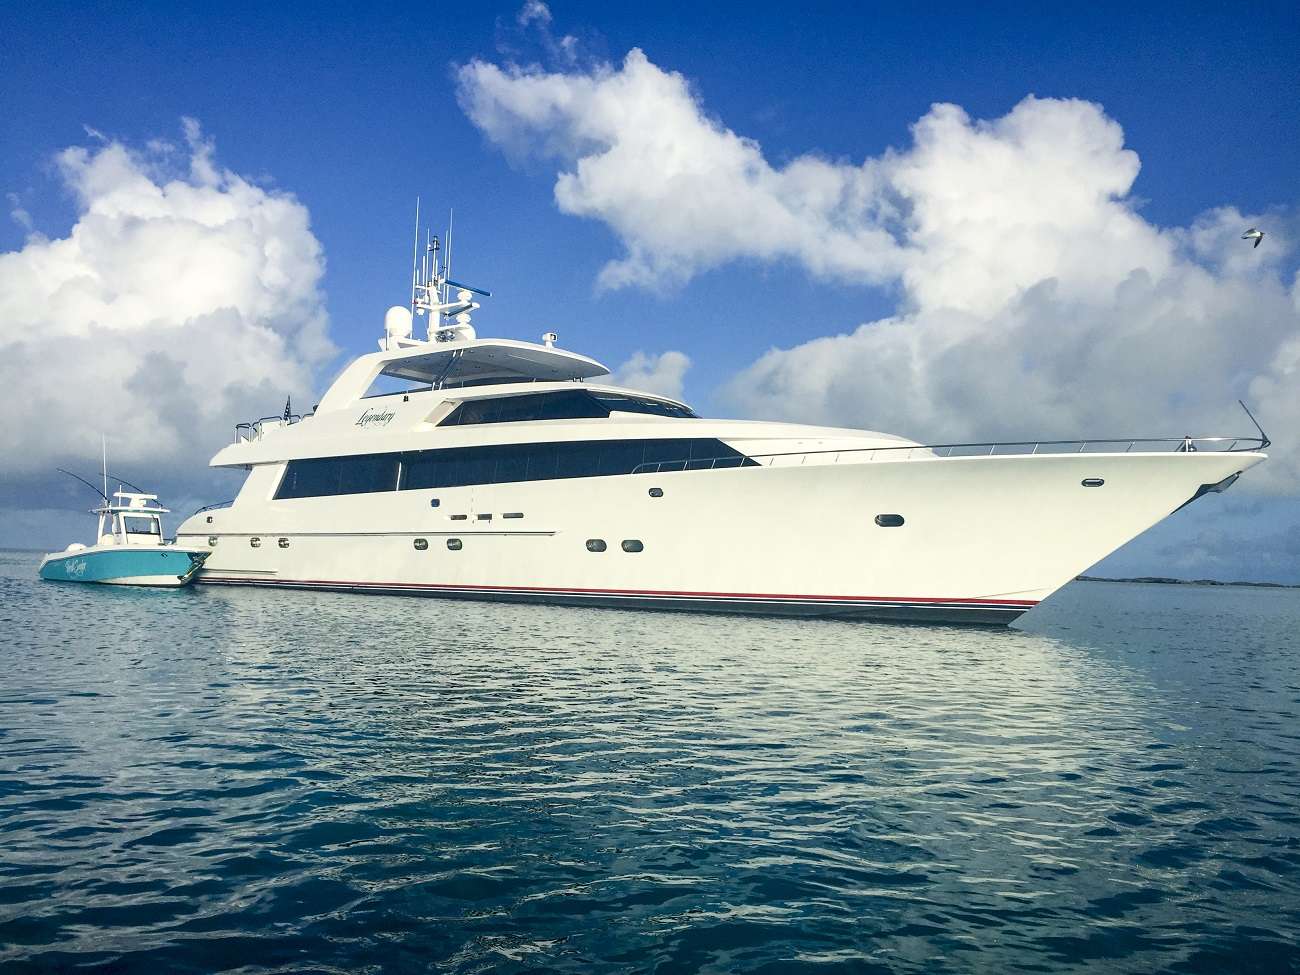 legendary - Yacht Charter Fort Lauderdale & Boat hire in Florida & Bahamas 1